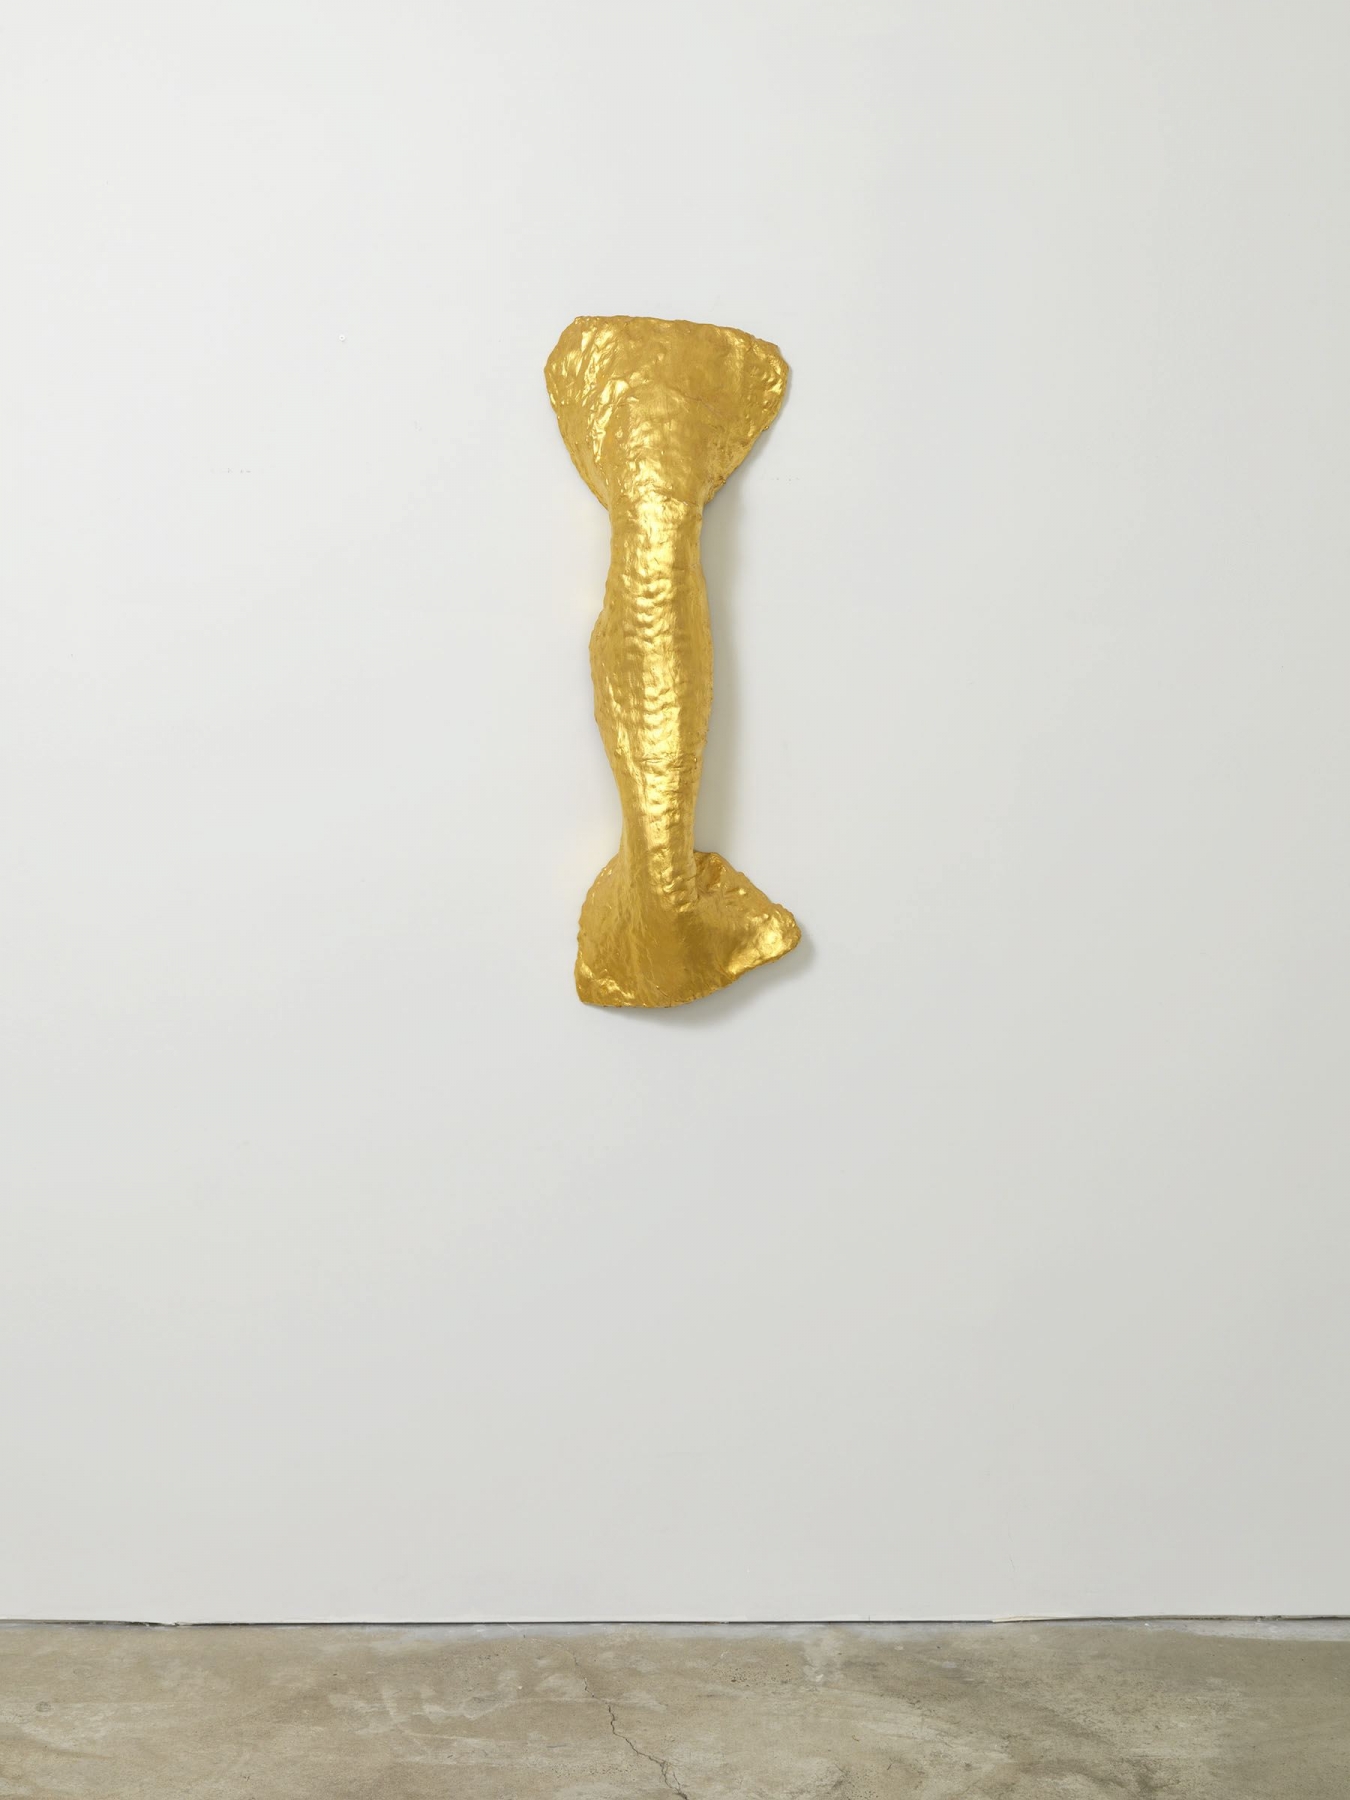 Lynda Benglis
FLOUNCE&nbsp; 1978
Chicken wire, cotton, plaster, gesso, oil based size, gold leaf
48 x 16 x 8 inches
121.9 x 40.6 x 20.3 centimeters
CR# BE.19424